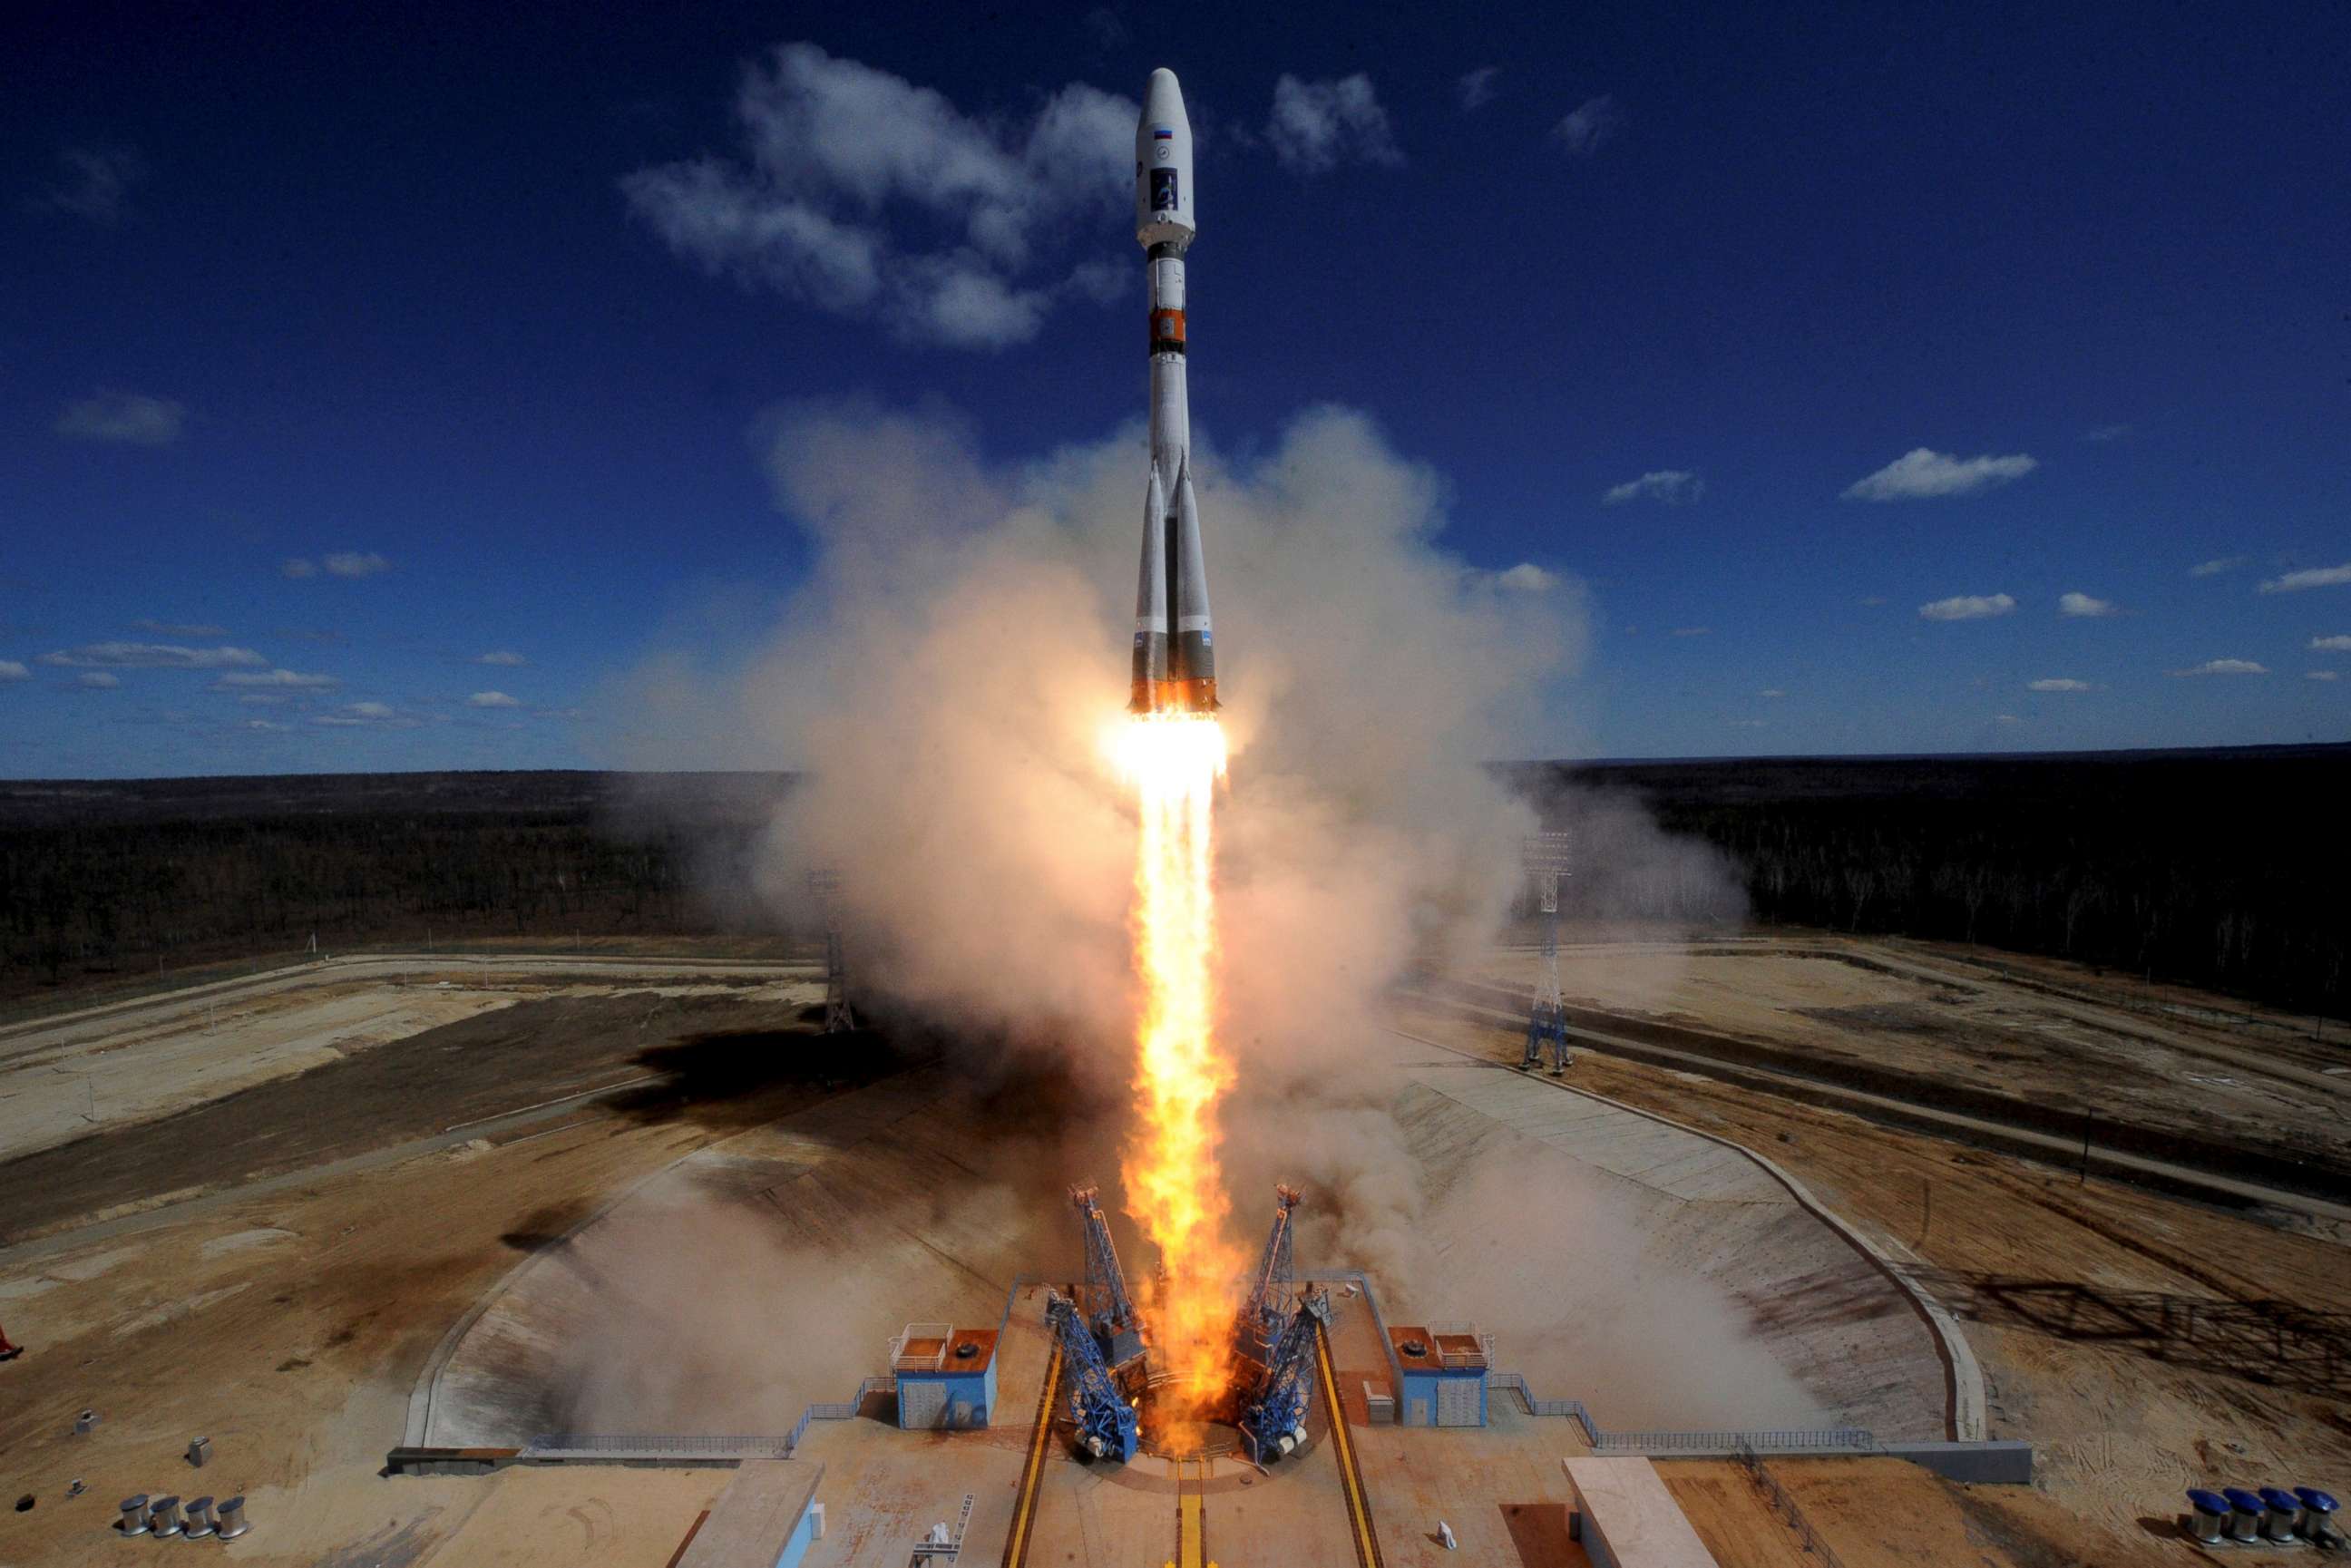 PHOTO: A Russian Soyuz 2.1A rocket carrying Lomonosov, Aist-2D and SamSat-218 satellites lifts off from the launch pad at the new Vostochny cosmodrome outside the city of Uglegorsk, in the far eastern Amur region, Russia on April 28, 2016. 